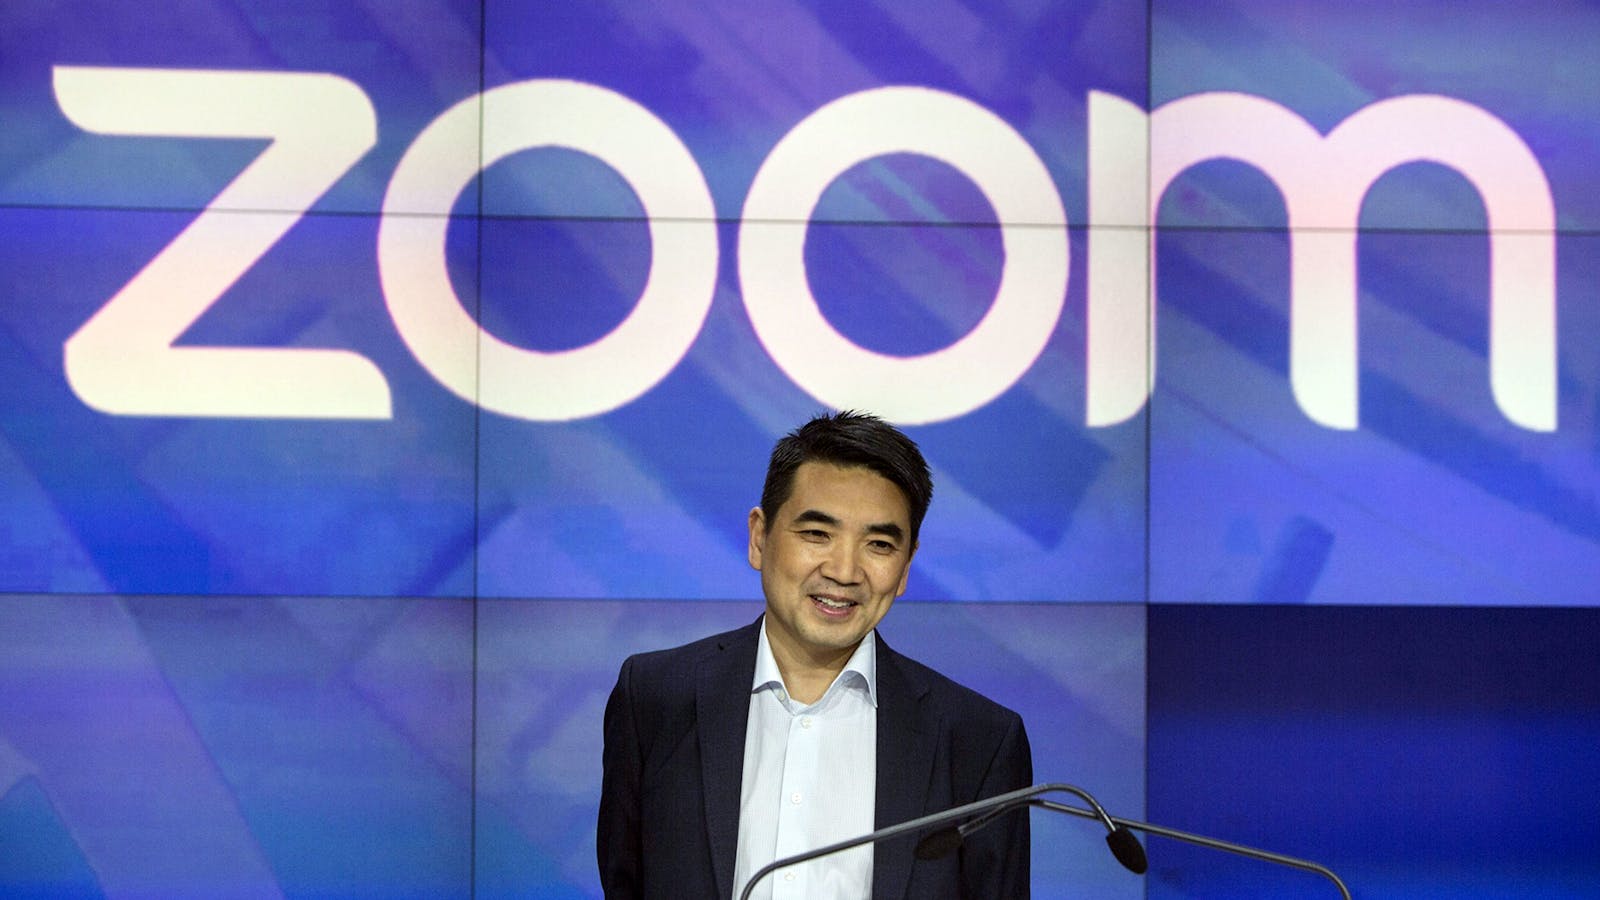 Zoom CEO Eric Yuan. Photo by Bloomberg